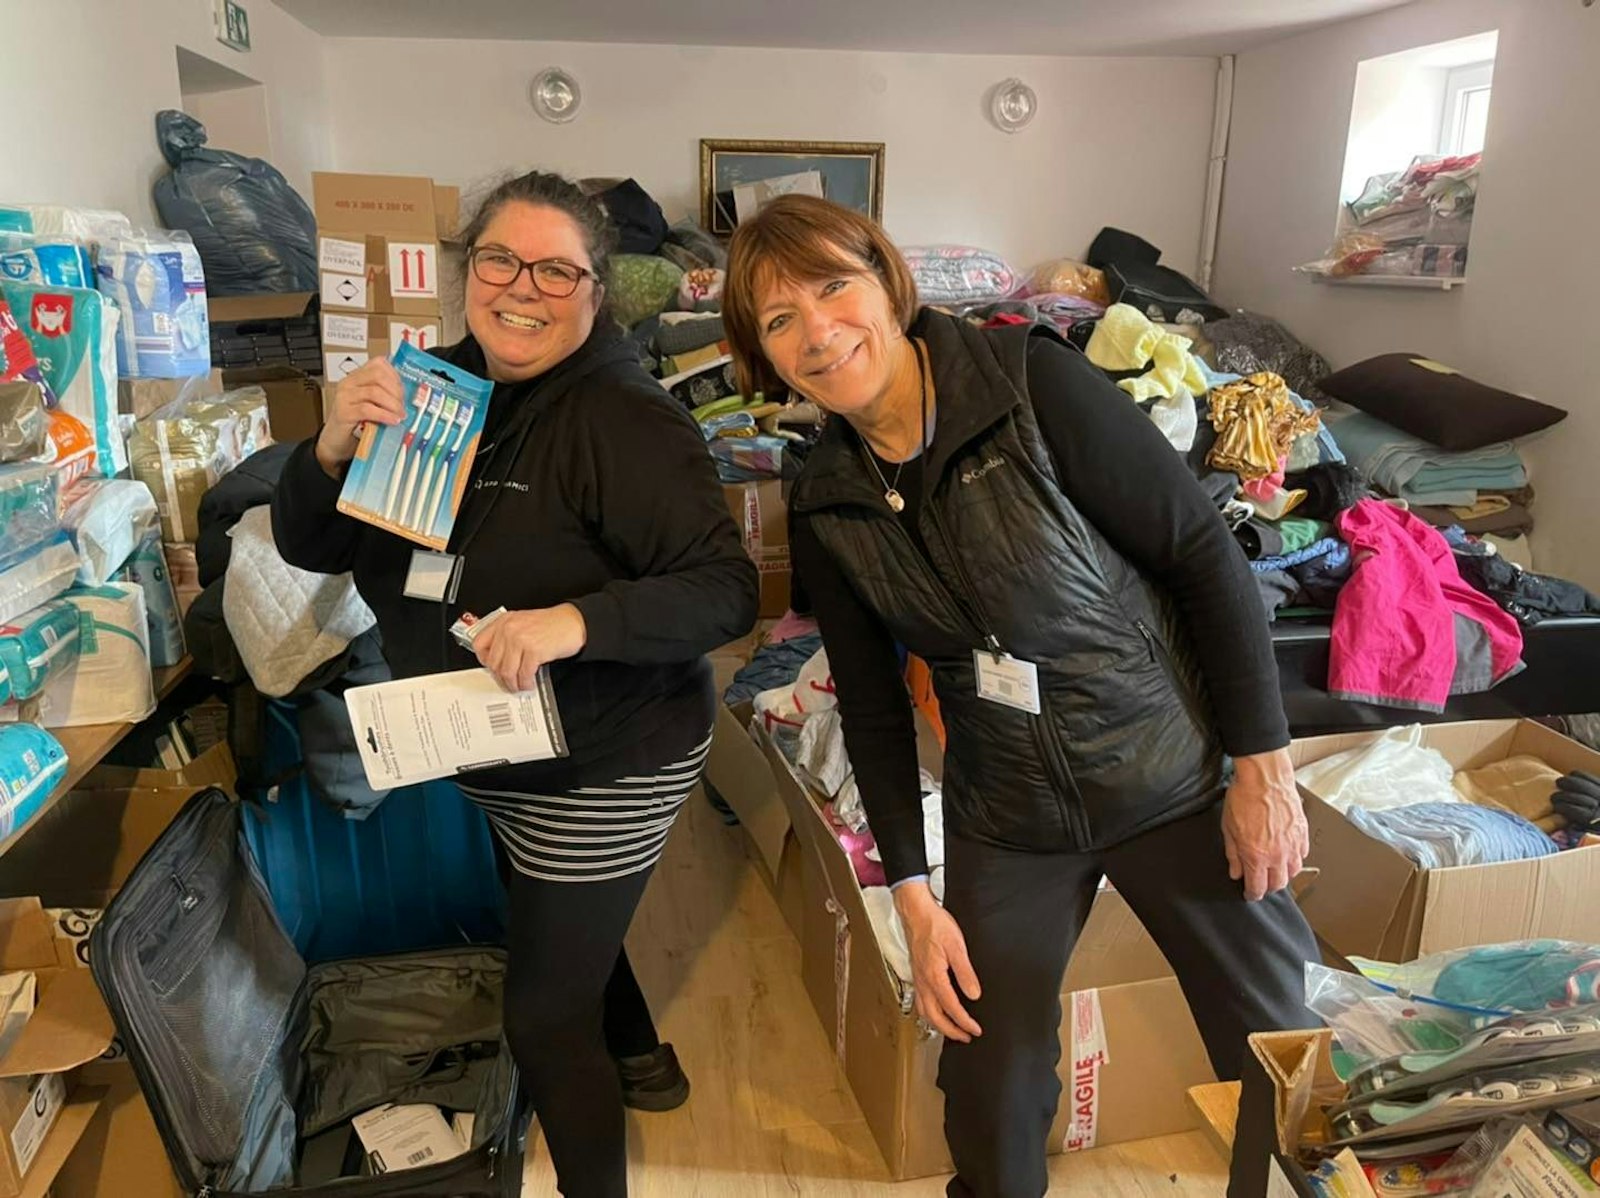 Sue Buckley, right, said she is forever changed but what she experienced. Individual Poles have also stepped up considerably to aid refugees, opening their hearts and homes to strangers who are fleeing their homeland.